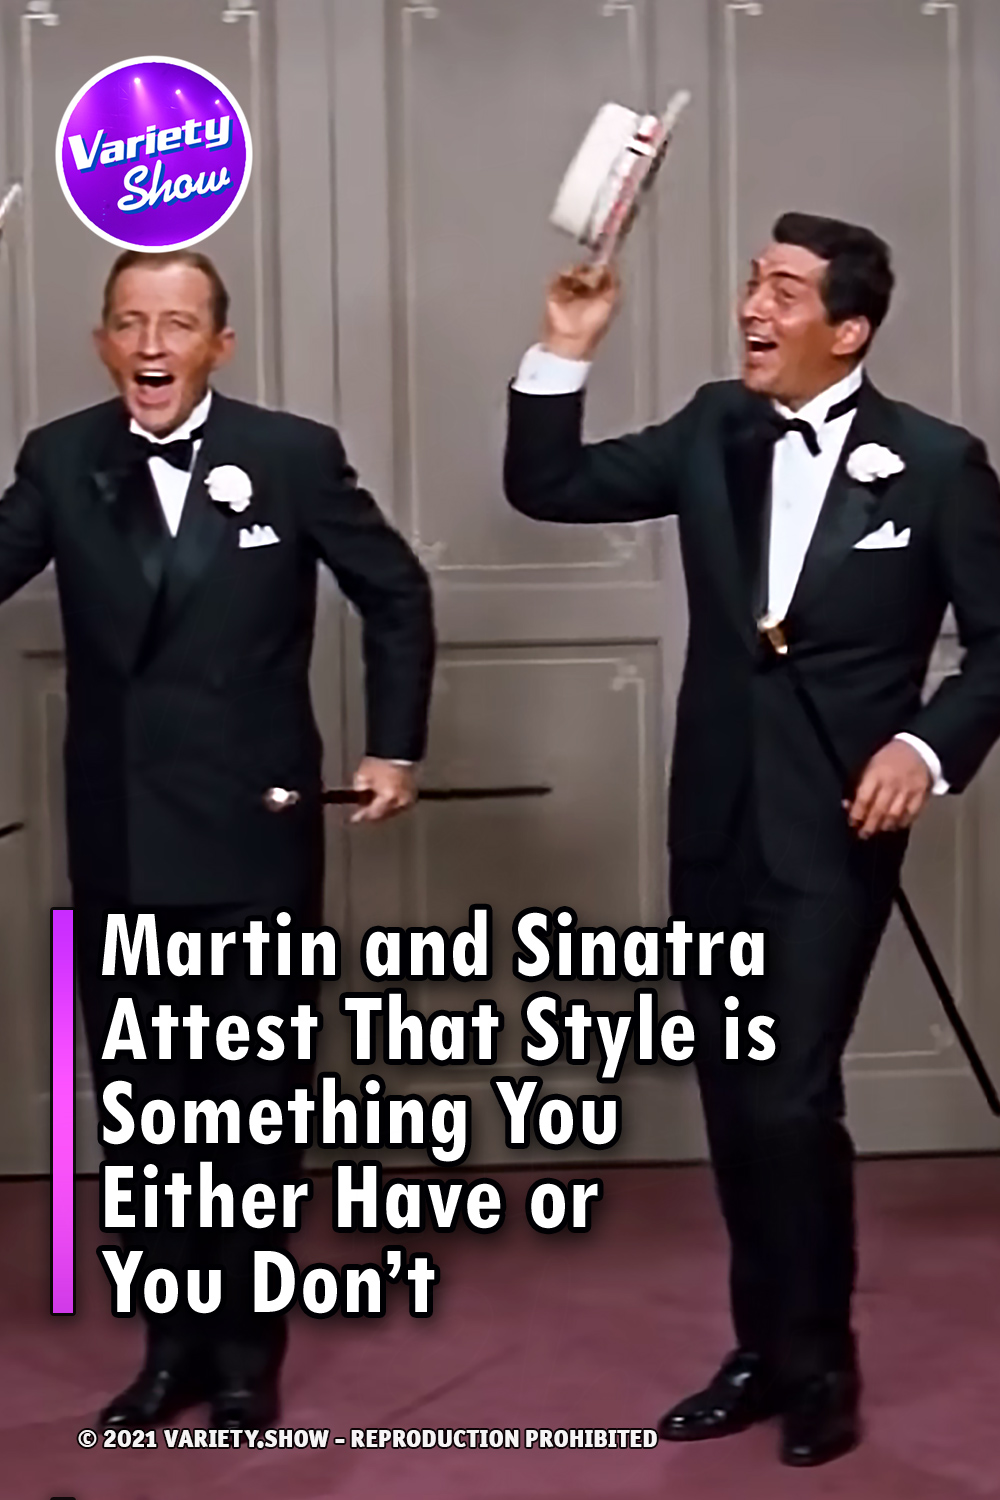 Martin and Sinatra Attest That Style is Something You Either Have or You Don’t